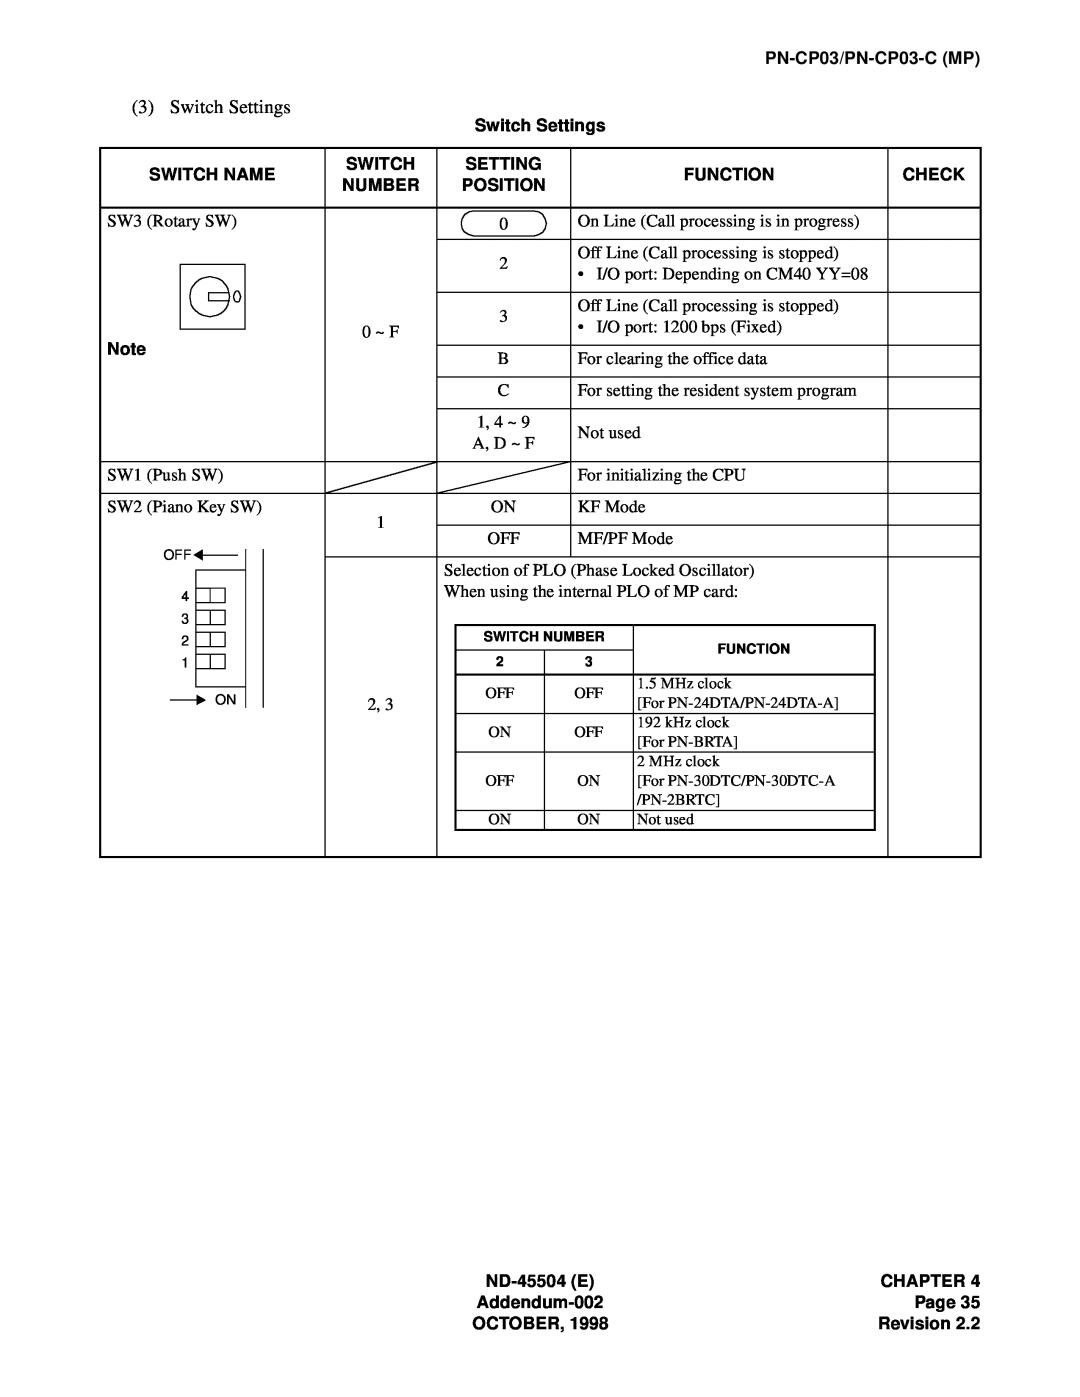 NEC 2000 IVS manual Switch Settings, SW3 Rotary SW 